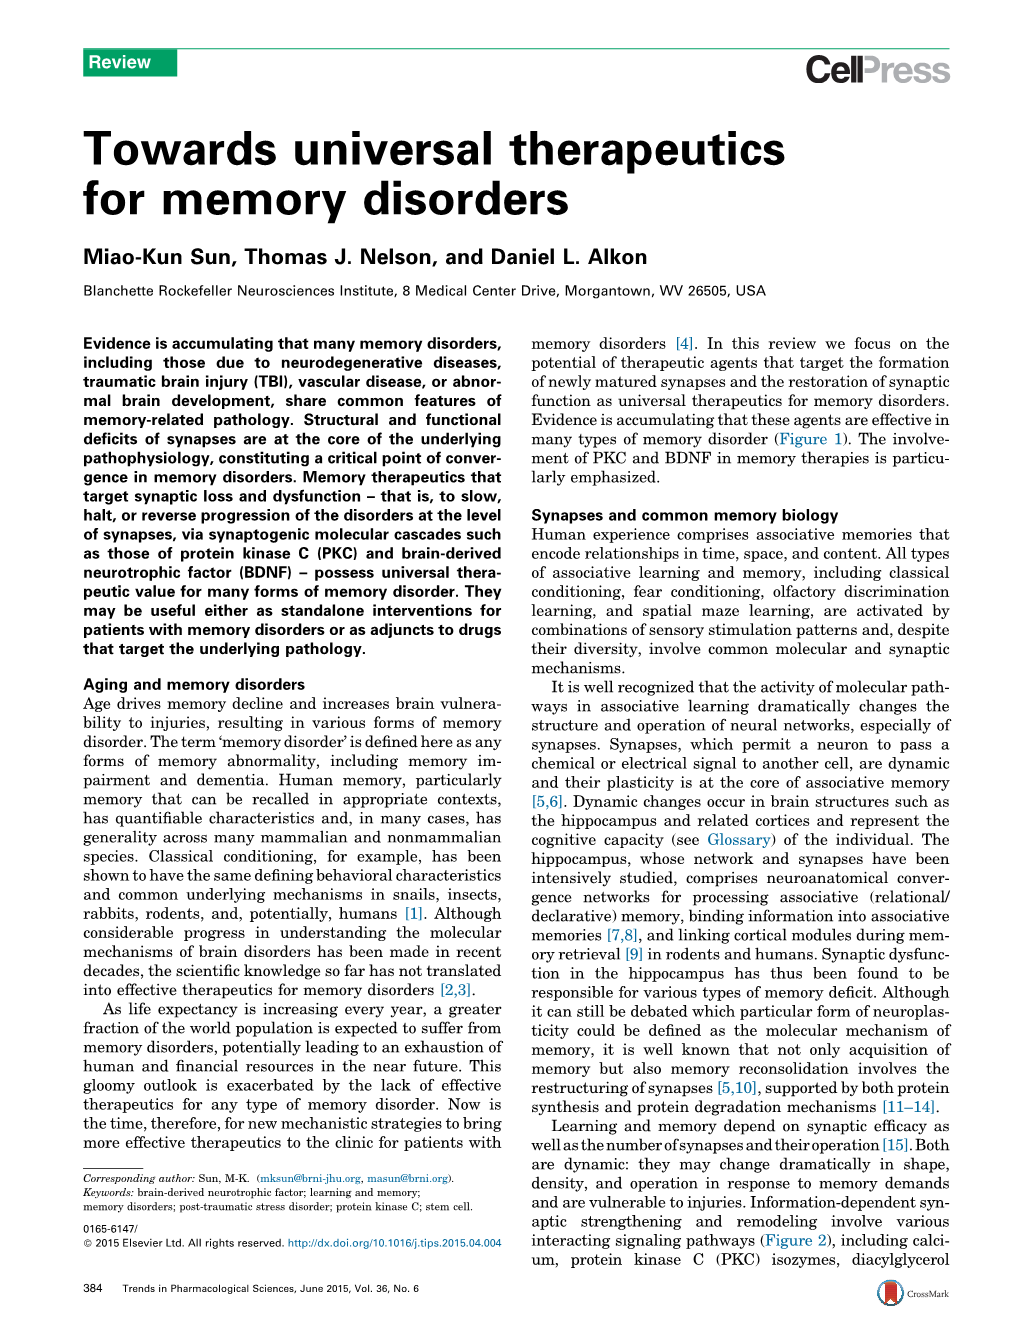 Towards Universal Therapeutics for Memory Disorders